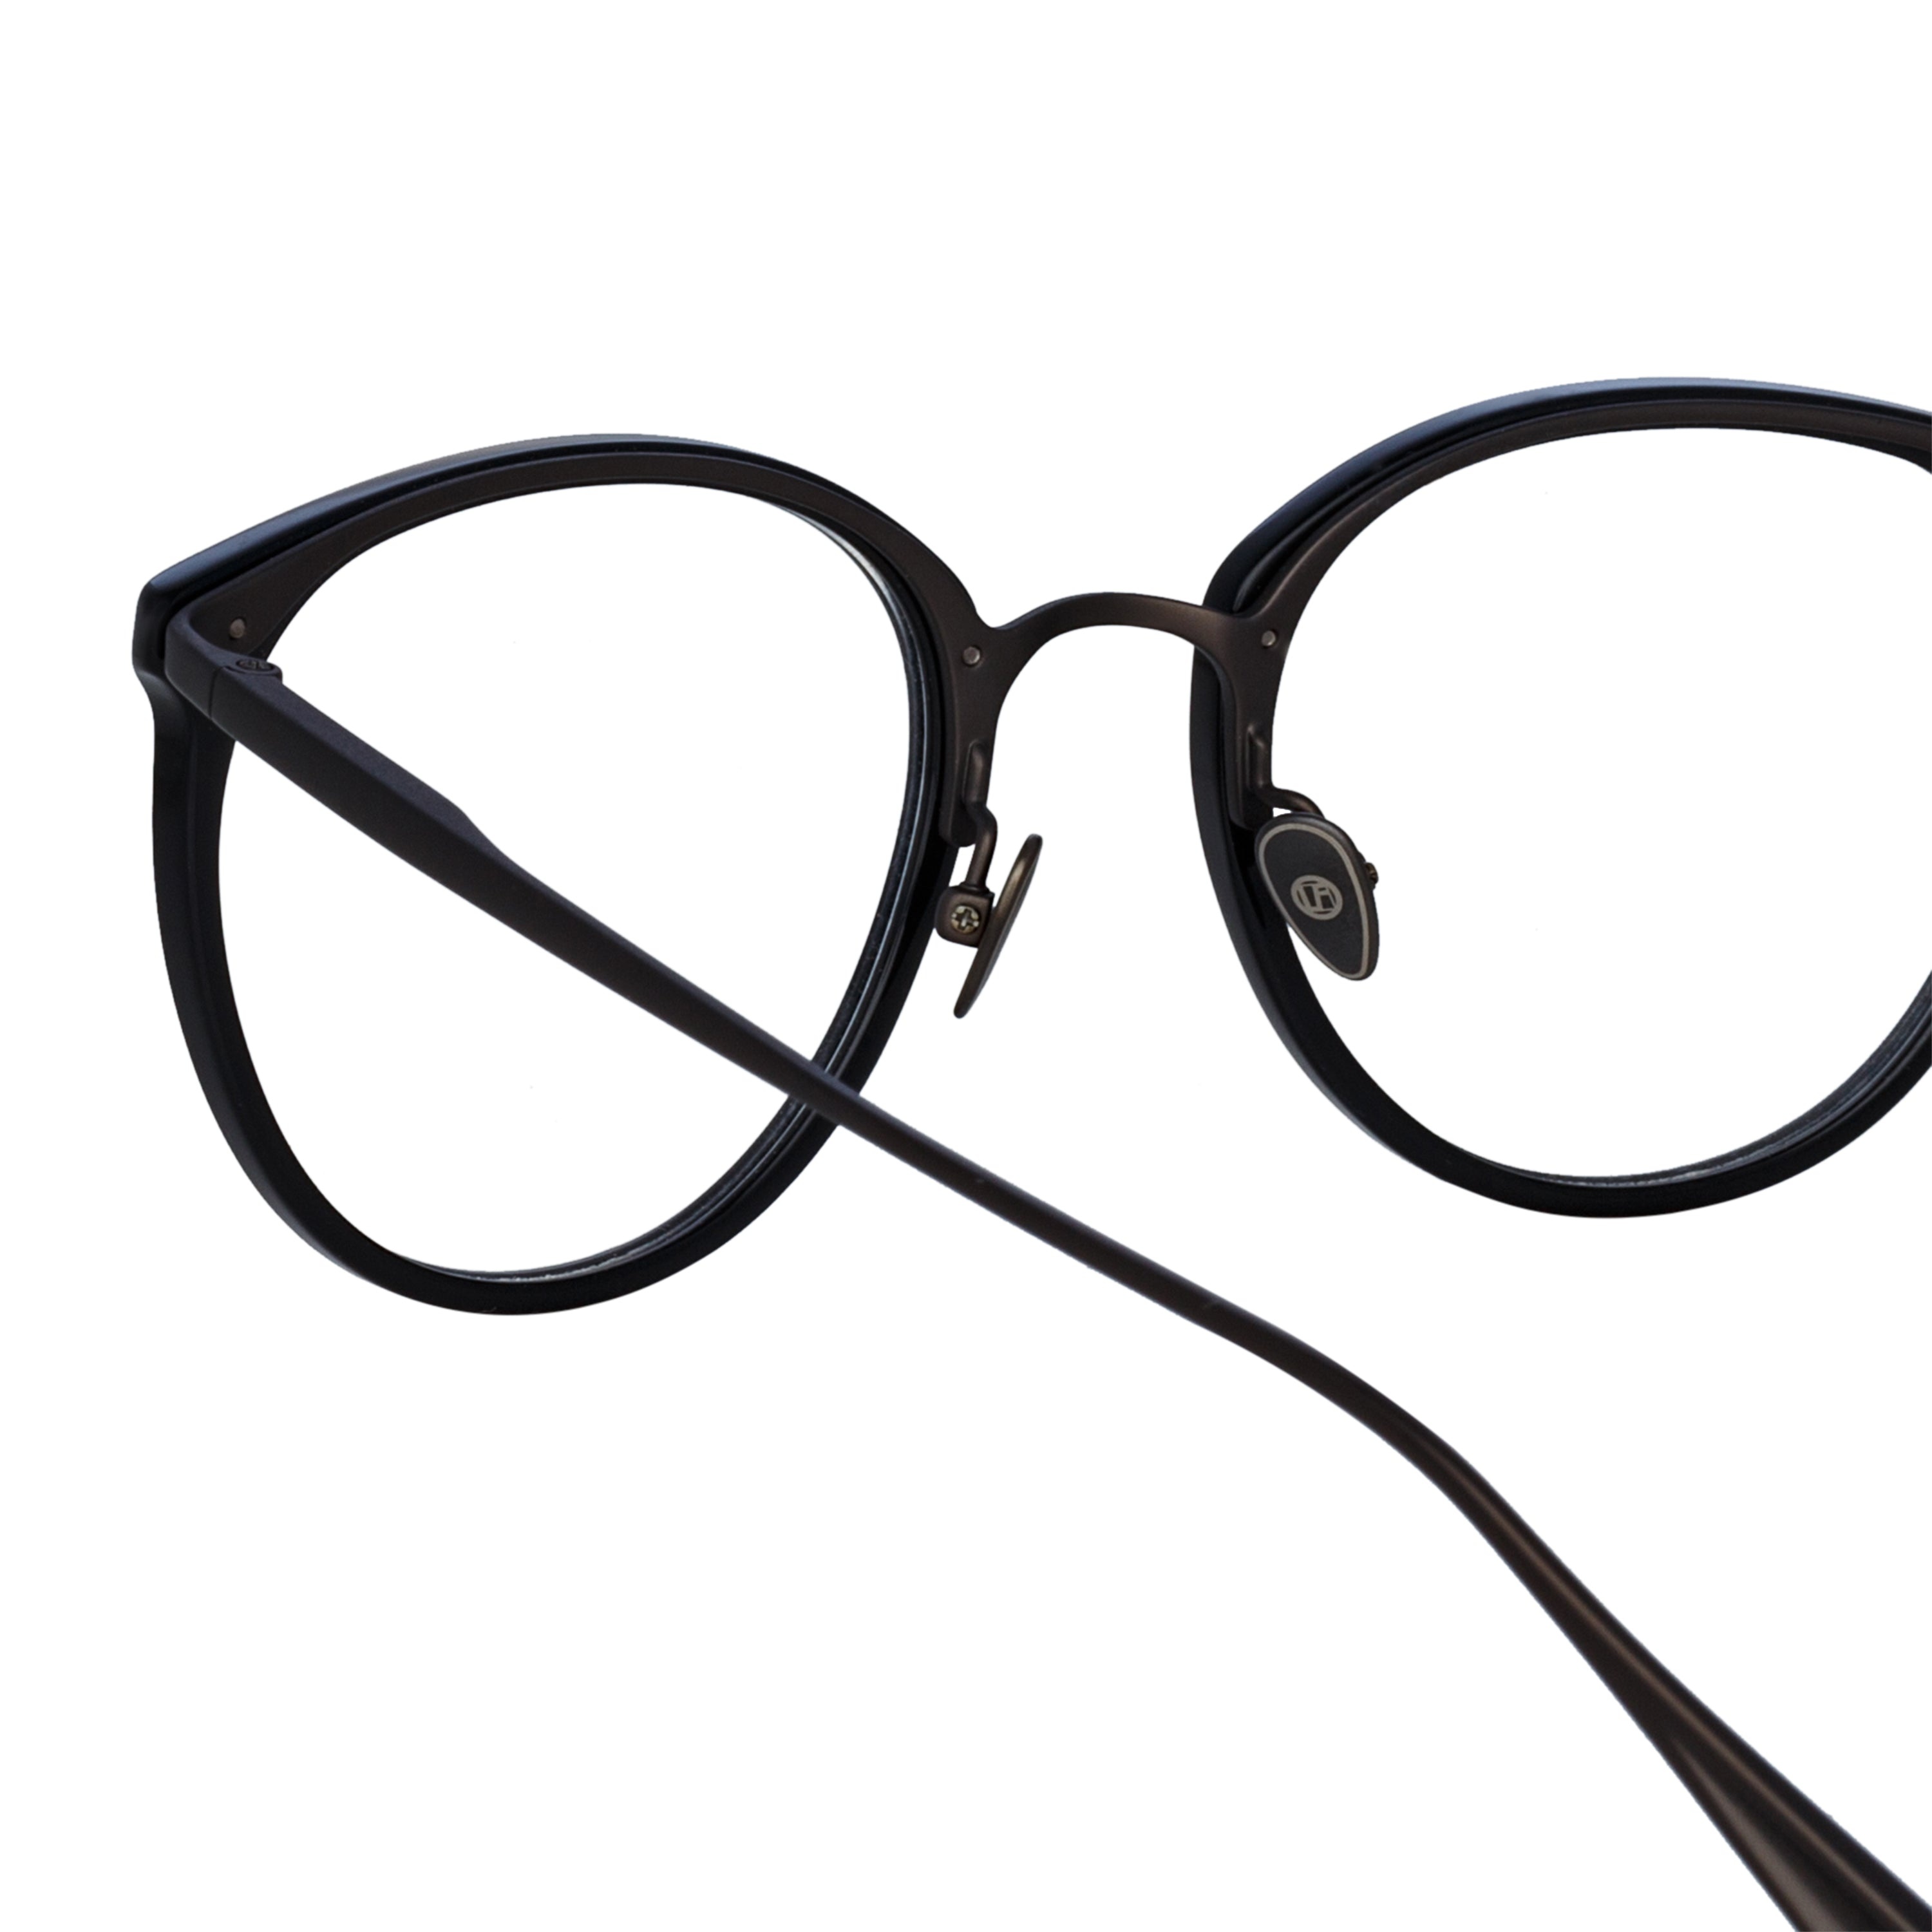 CALTHORPE OVAL OPTICAL FRAME IN BLACK AND NICKEL - 4